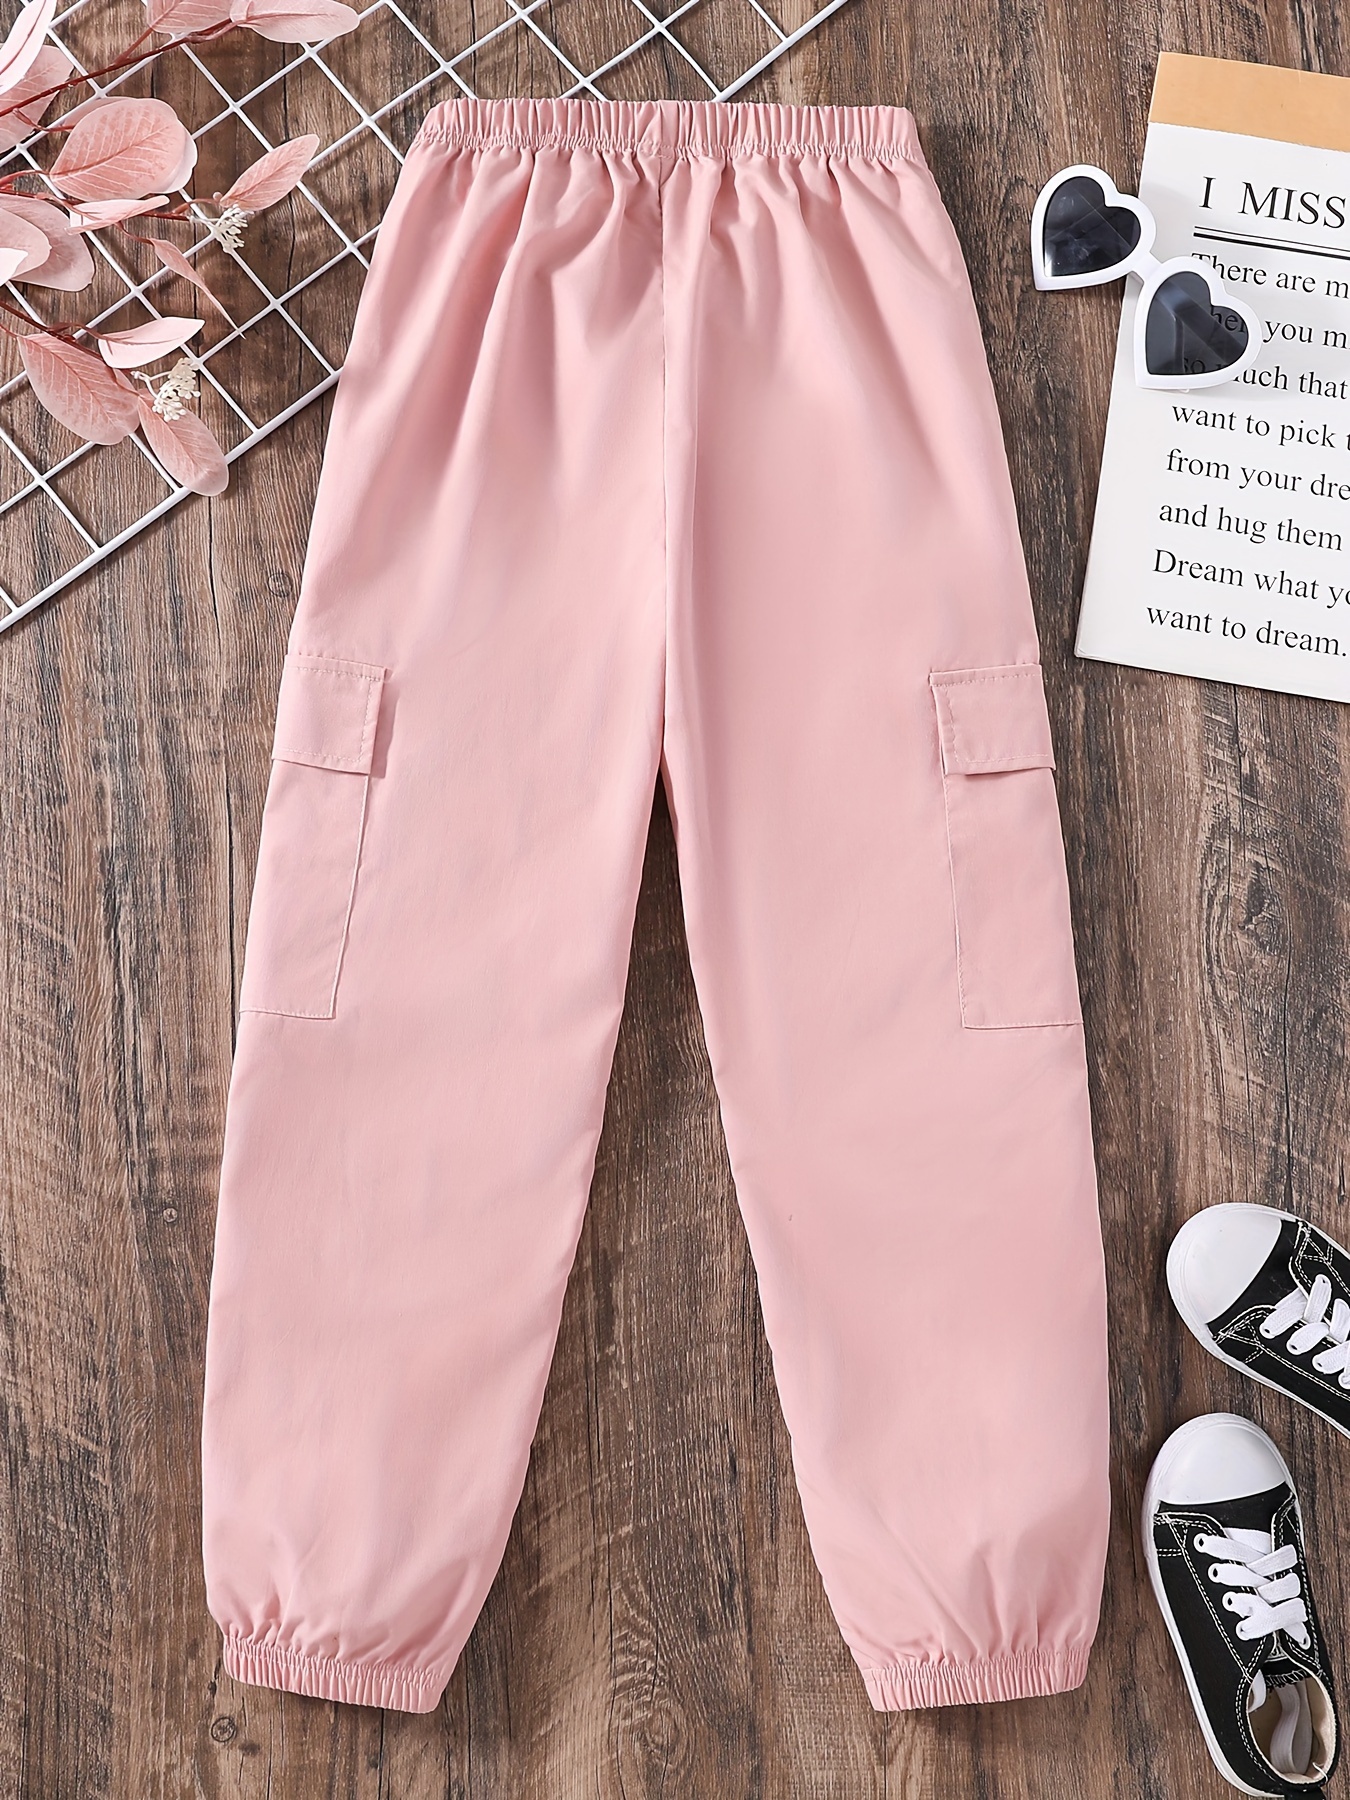 New Korean Teenage Girls Cargo Pants Solid Color Kids Pants Casual Style  Trousers For Children Child Girl Clothes 8 10 14 Year